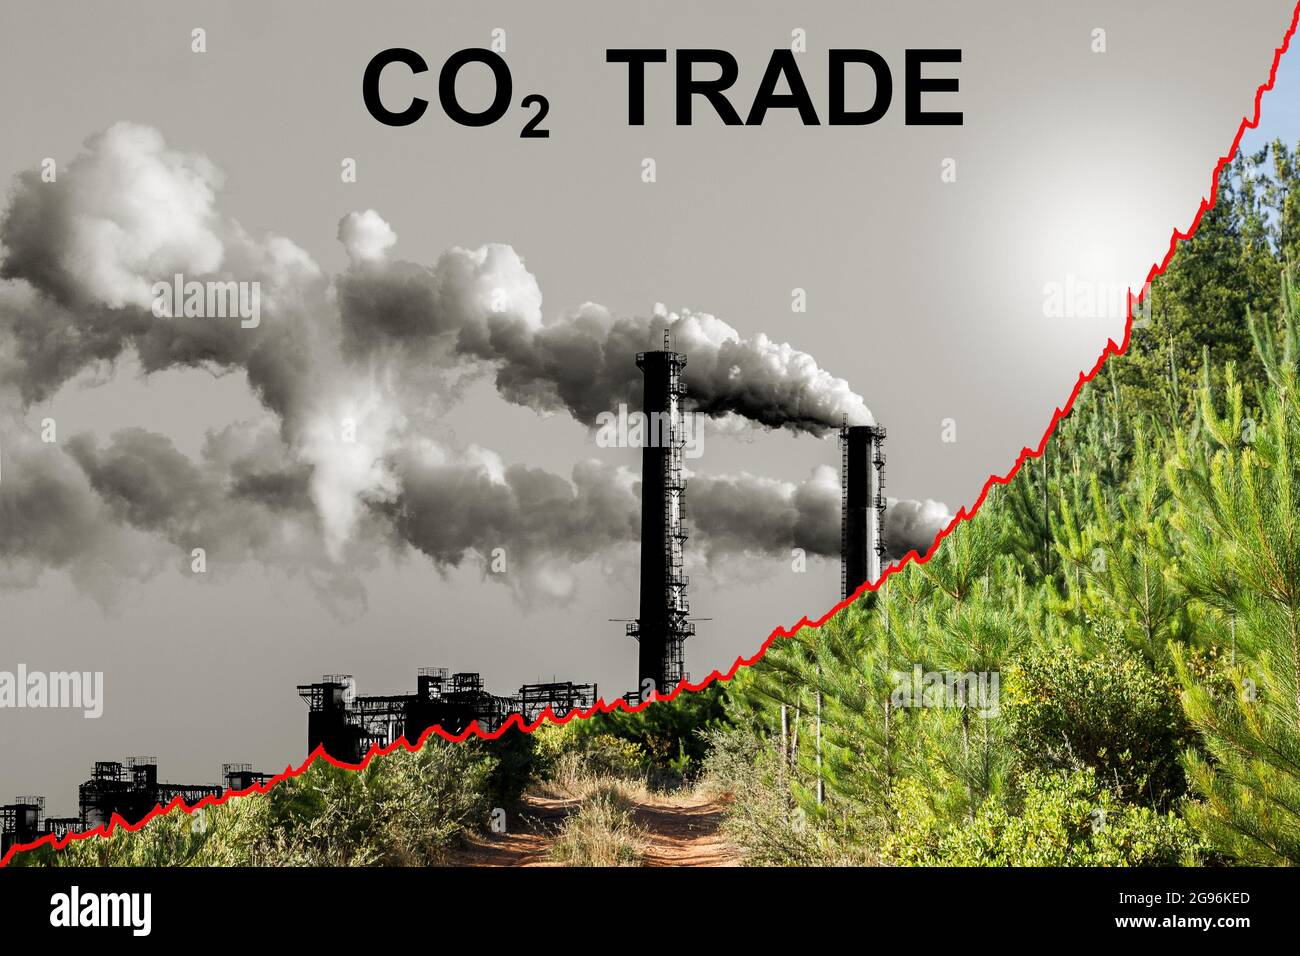 CO2 carbon dioxide emission rights certicication certificates trading with rising price chart Stock Photo